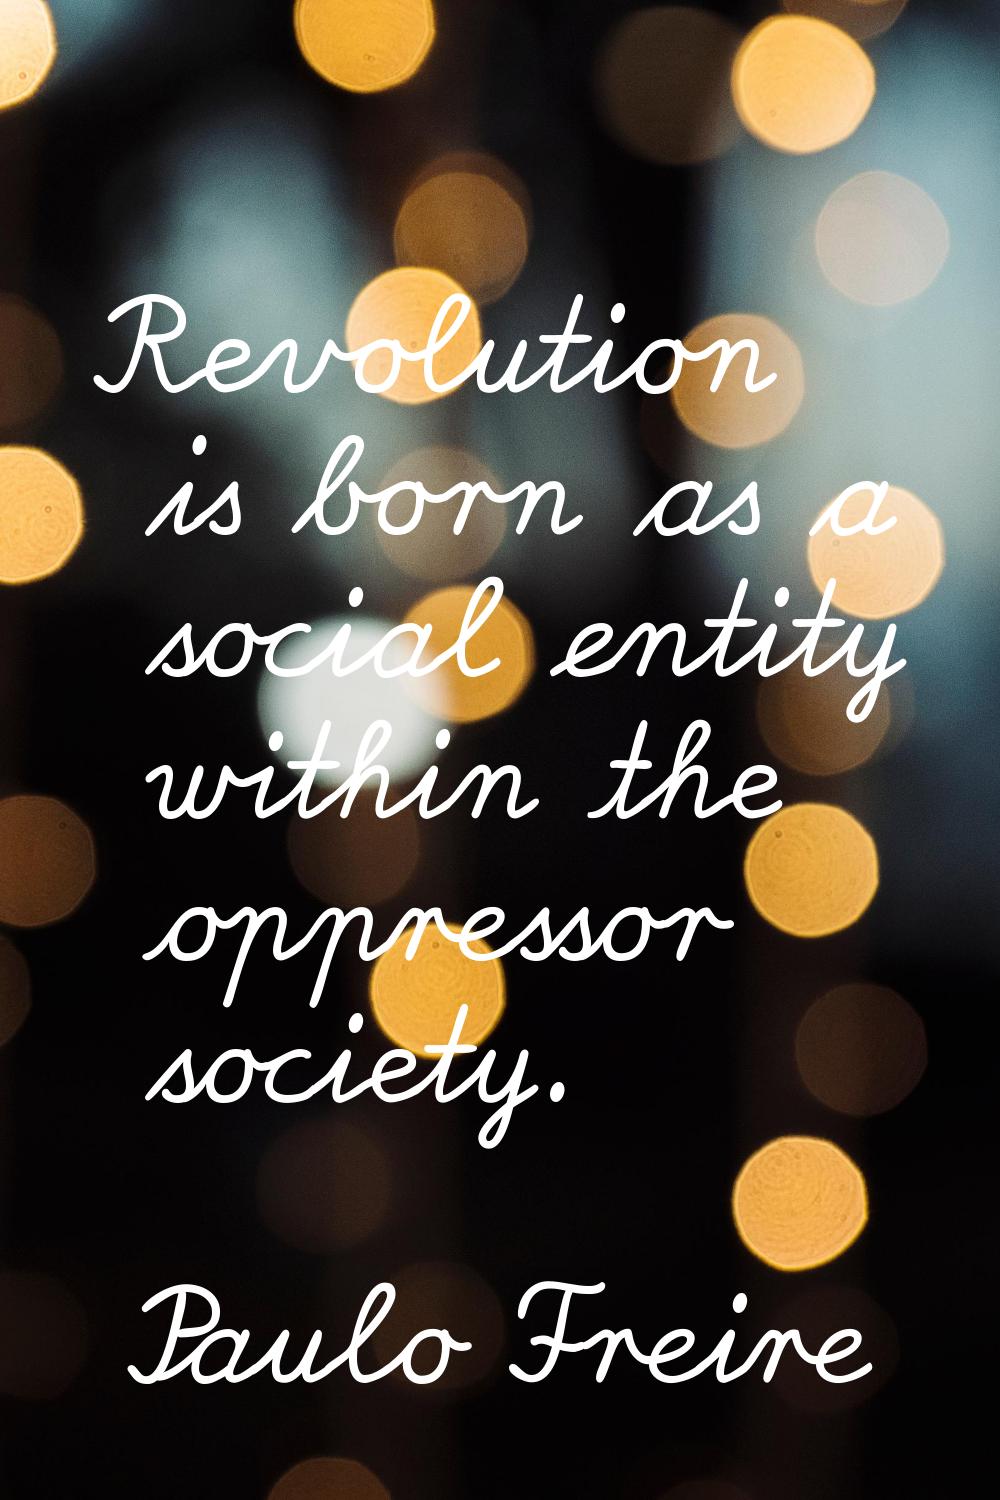 Revolution is born as a social entity within the oppressor society.